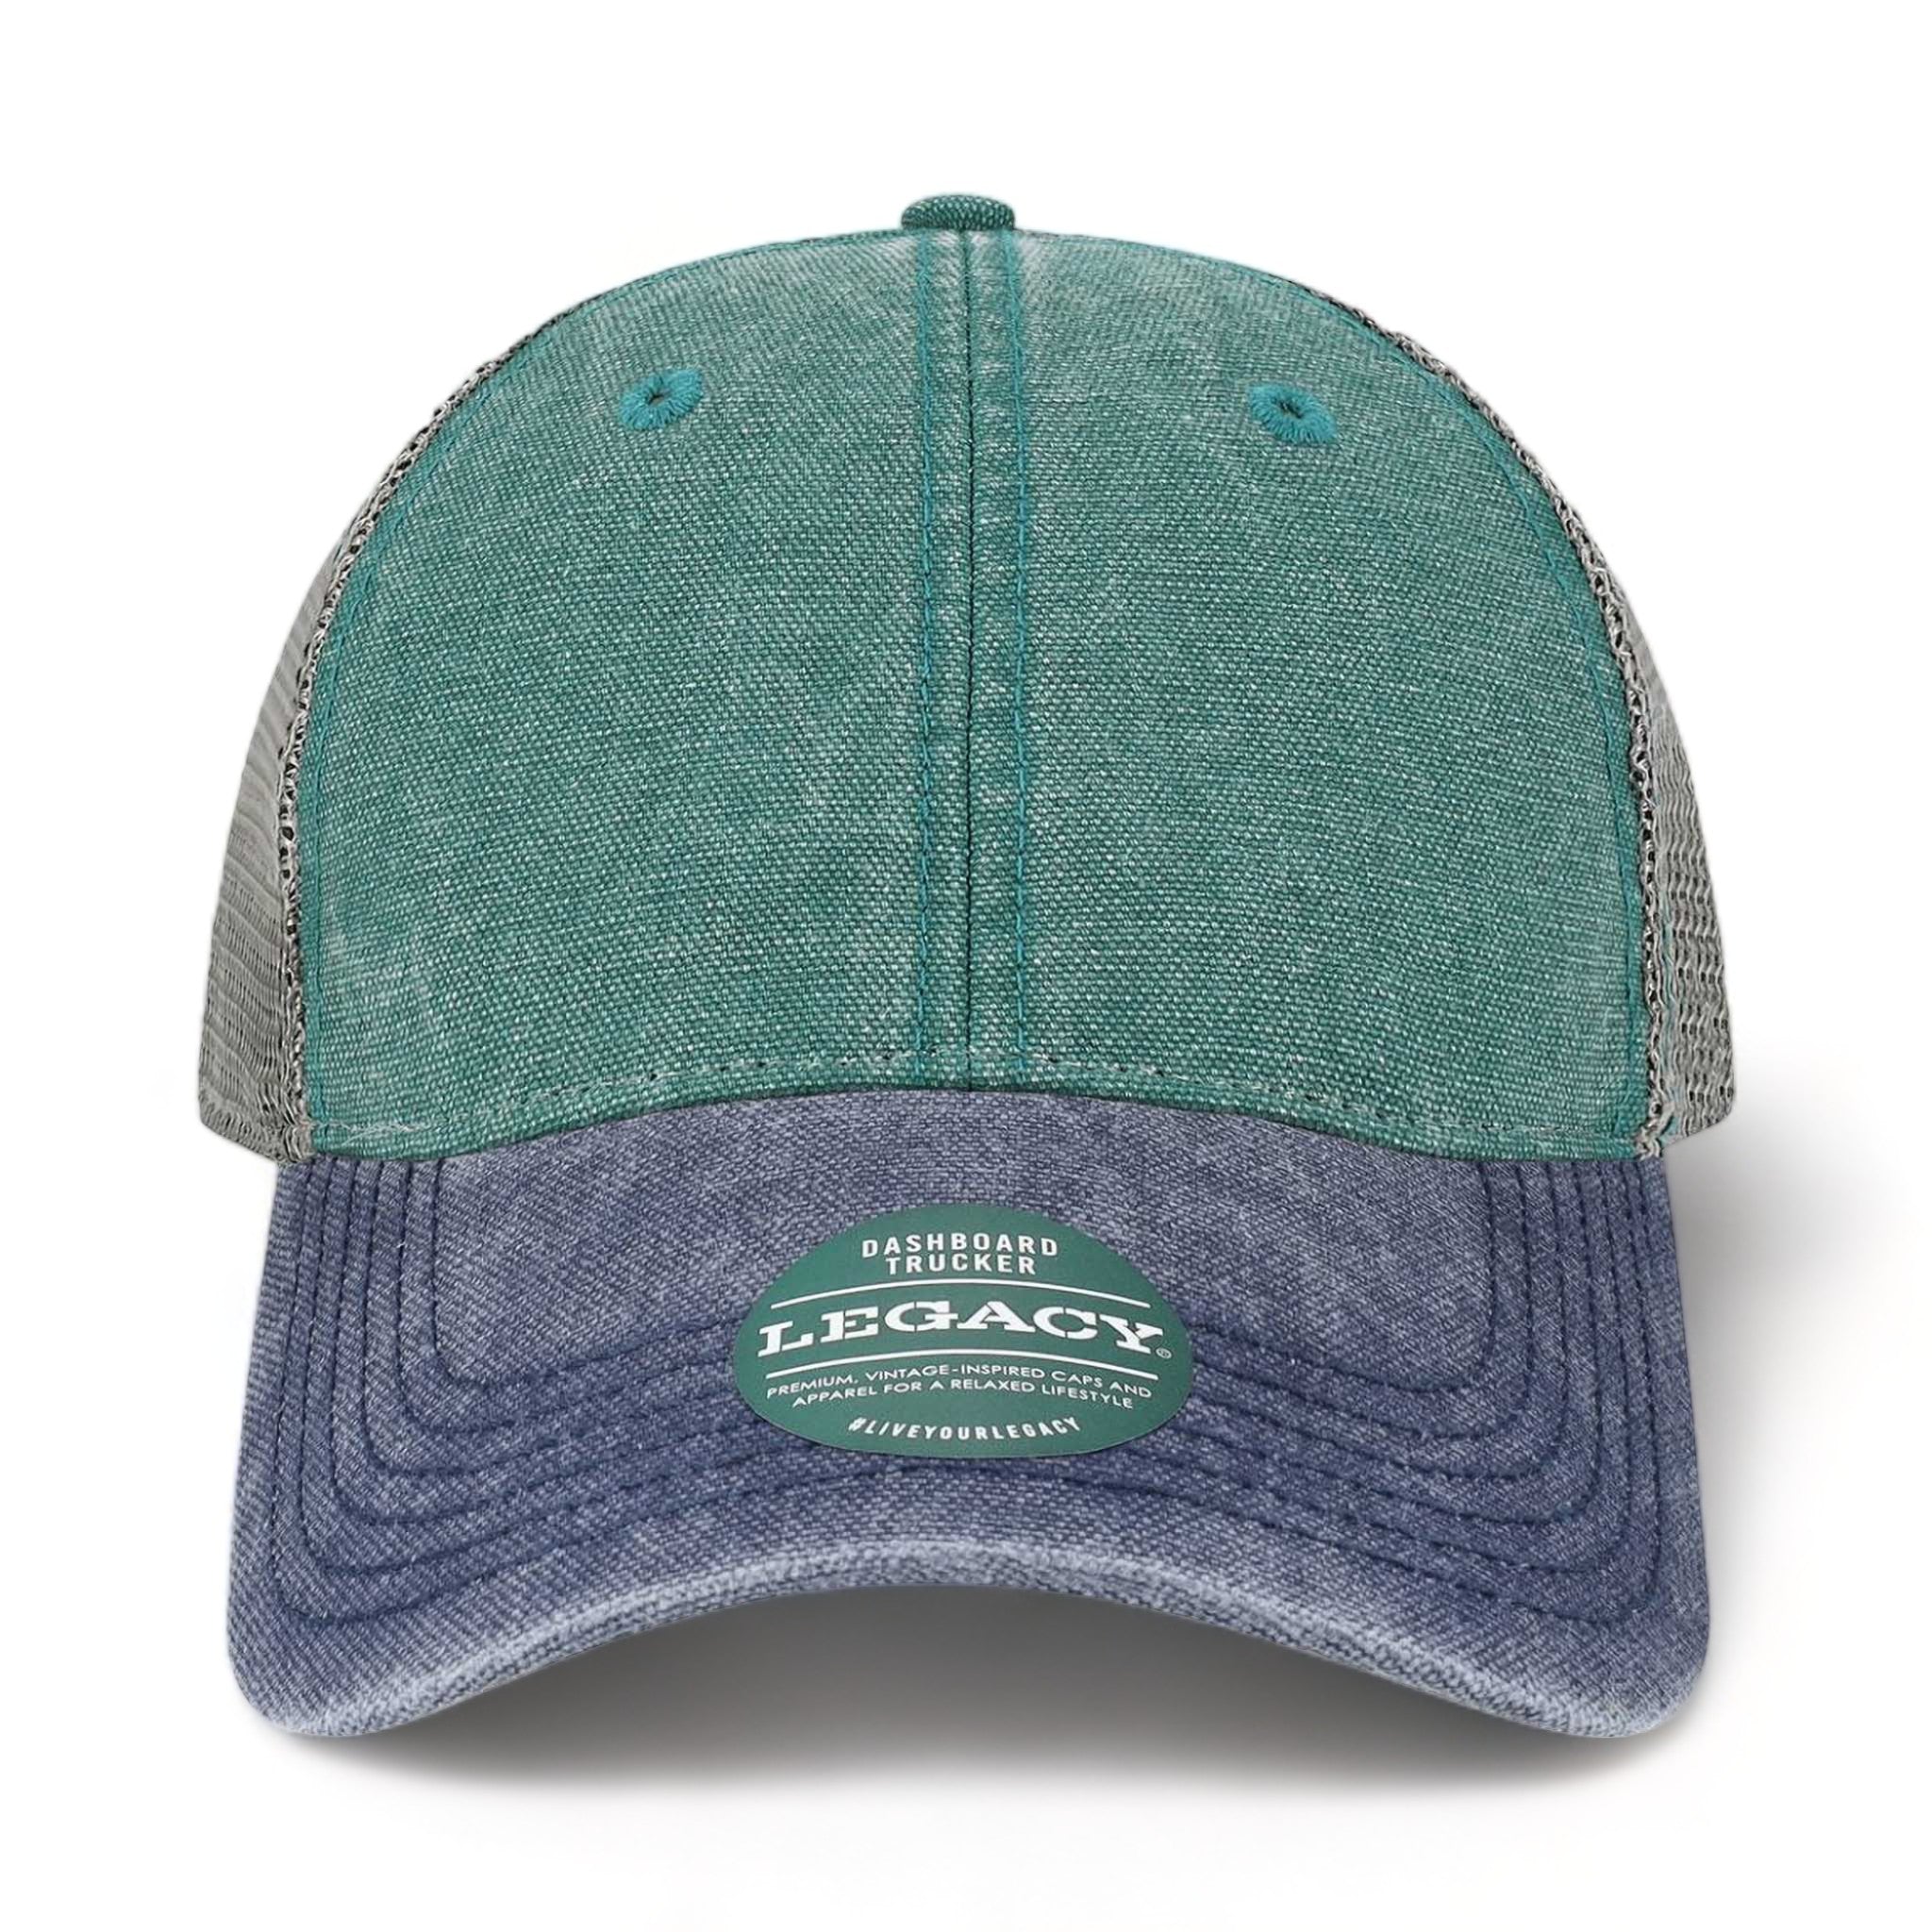 Front view of LEGACY DTA custom hat in marine, navy and grey